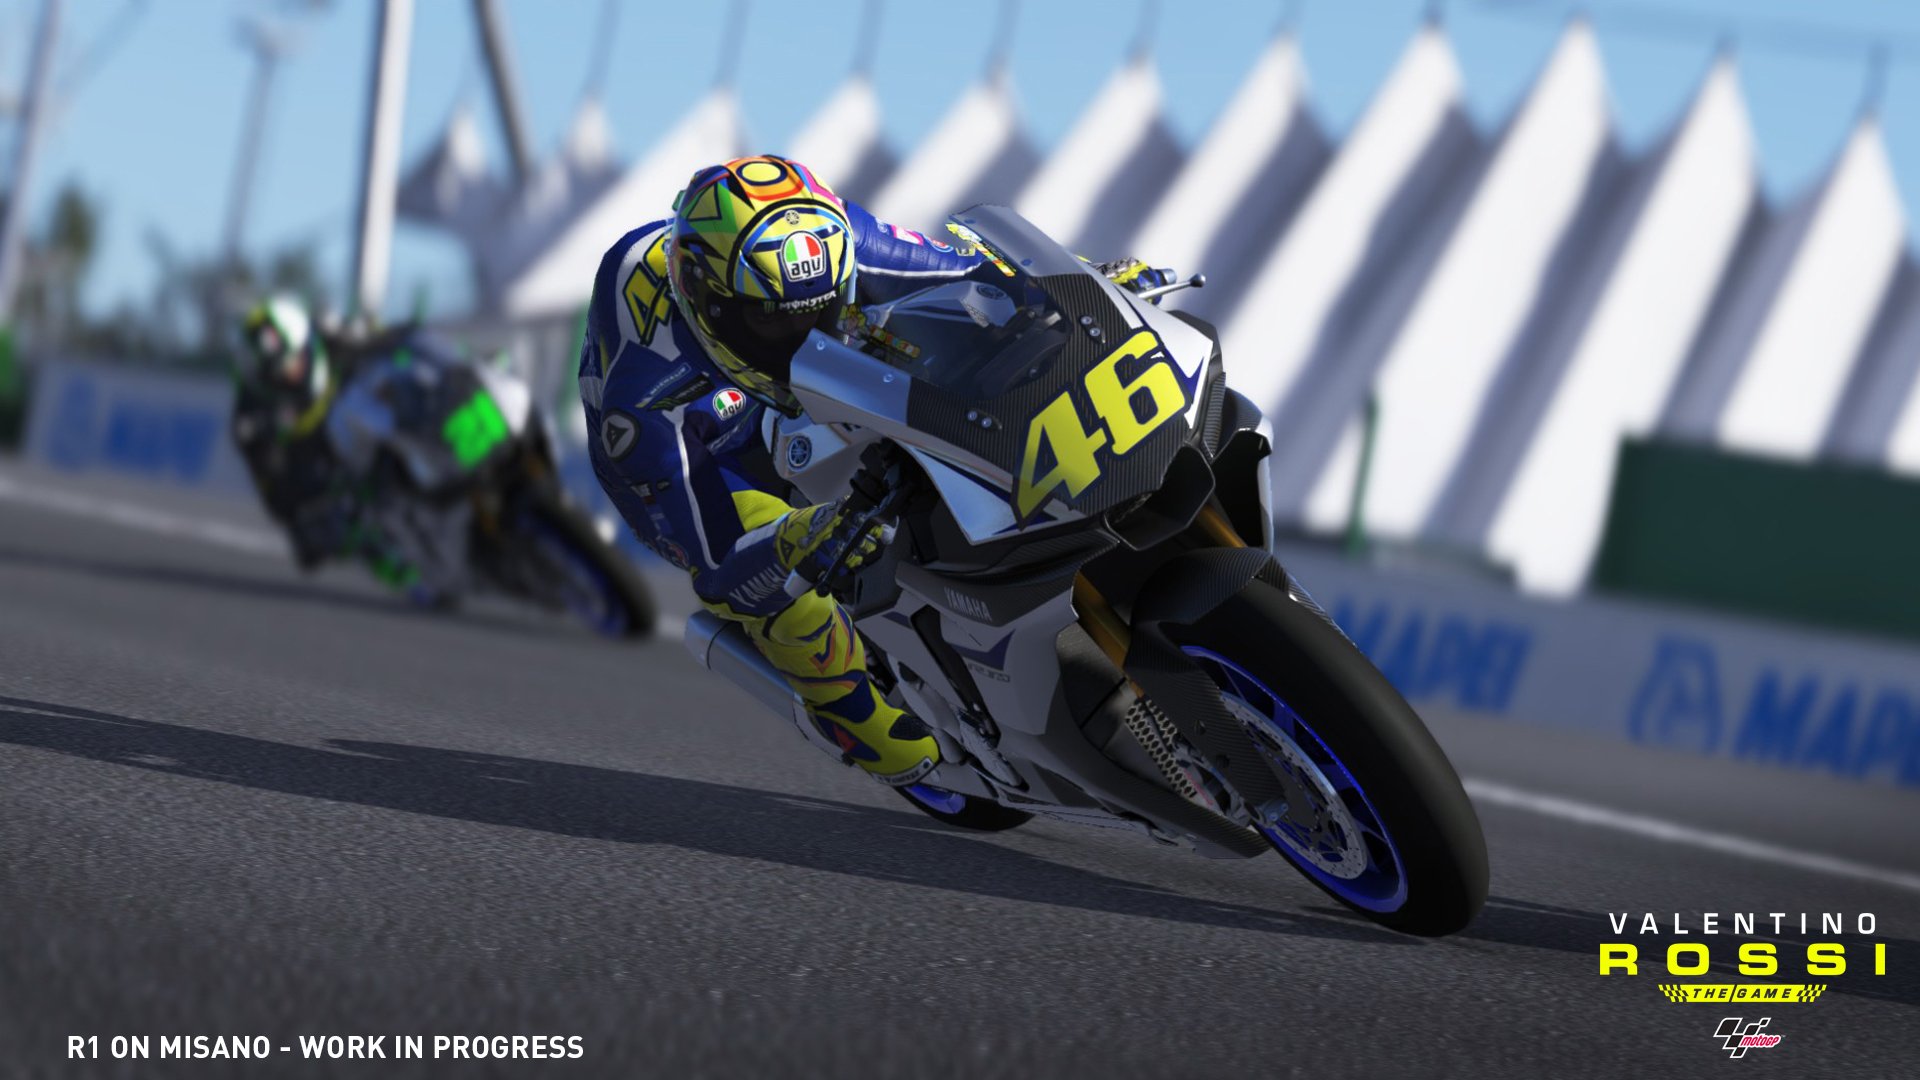 Wallpaper Valentino Rossi Hd Early Imageif With Cartoon - Valentino Rossi Game Xbox One - HD Wallpaper 